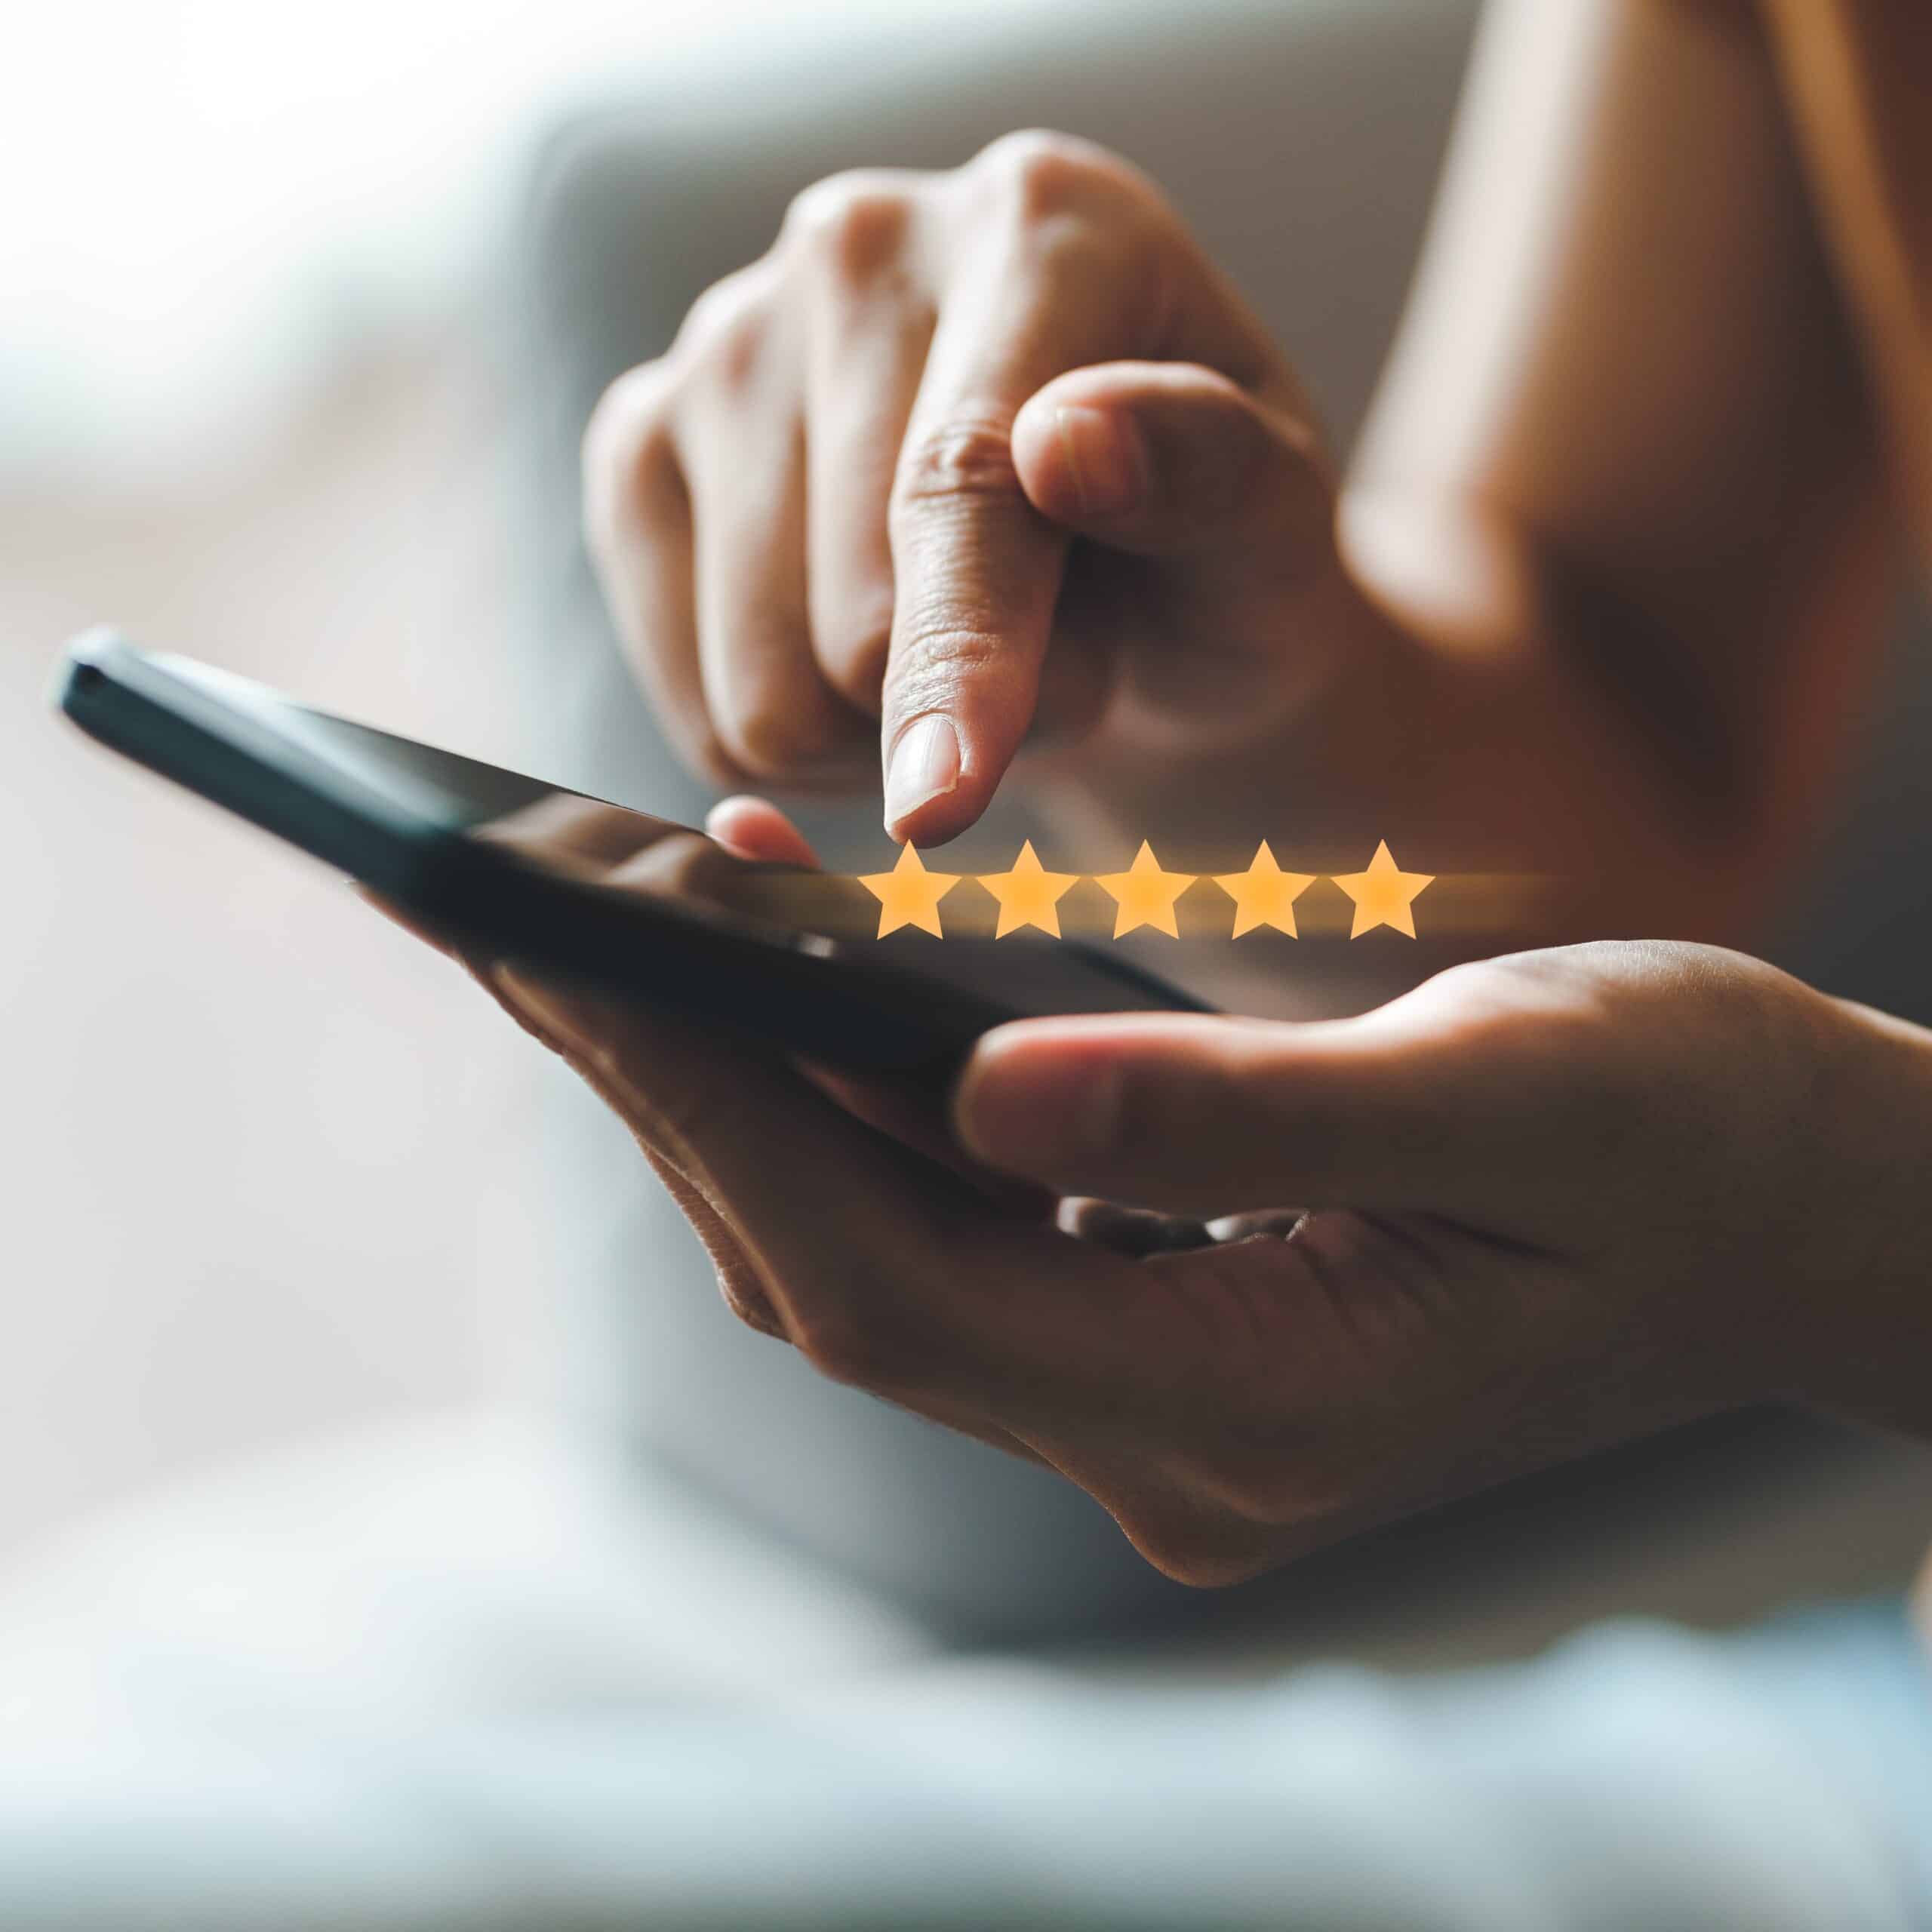 Close up of a customer giving a five star rating on smartphone. Review, Service rating, satisfaction, Customer service experience and satisfaction survey